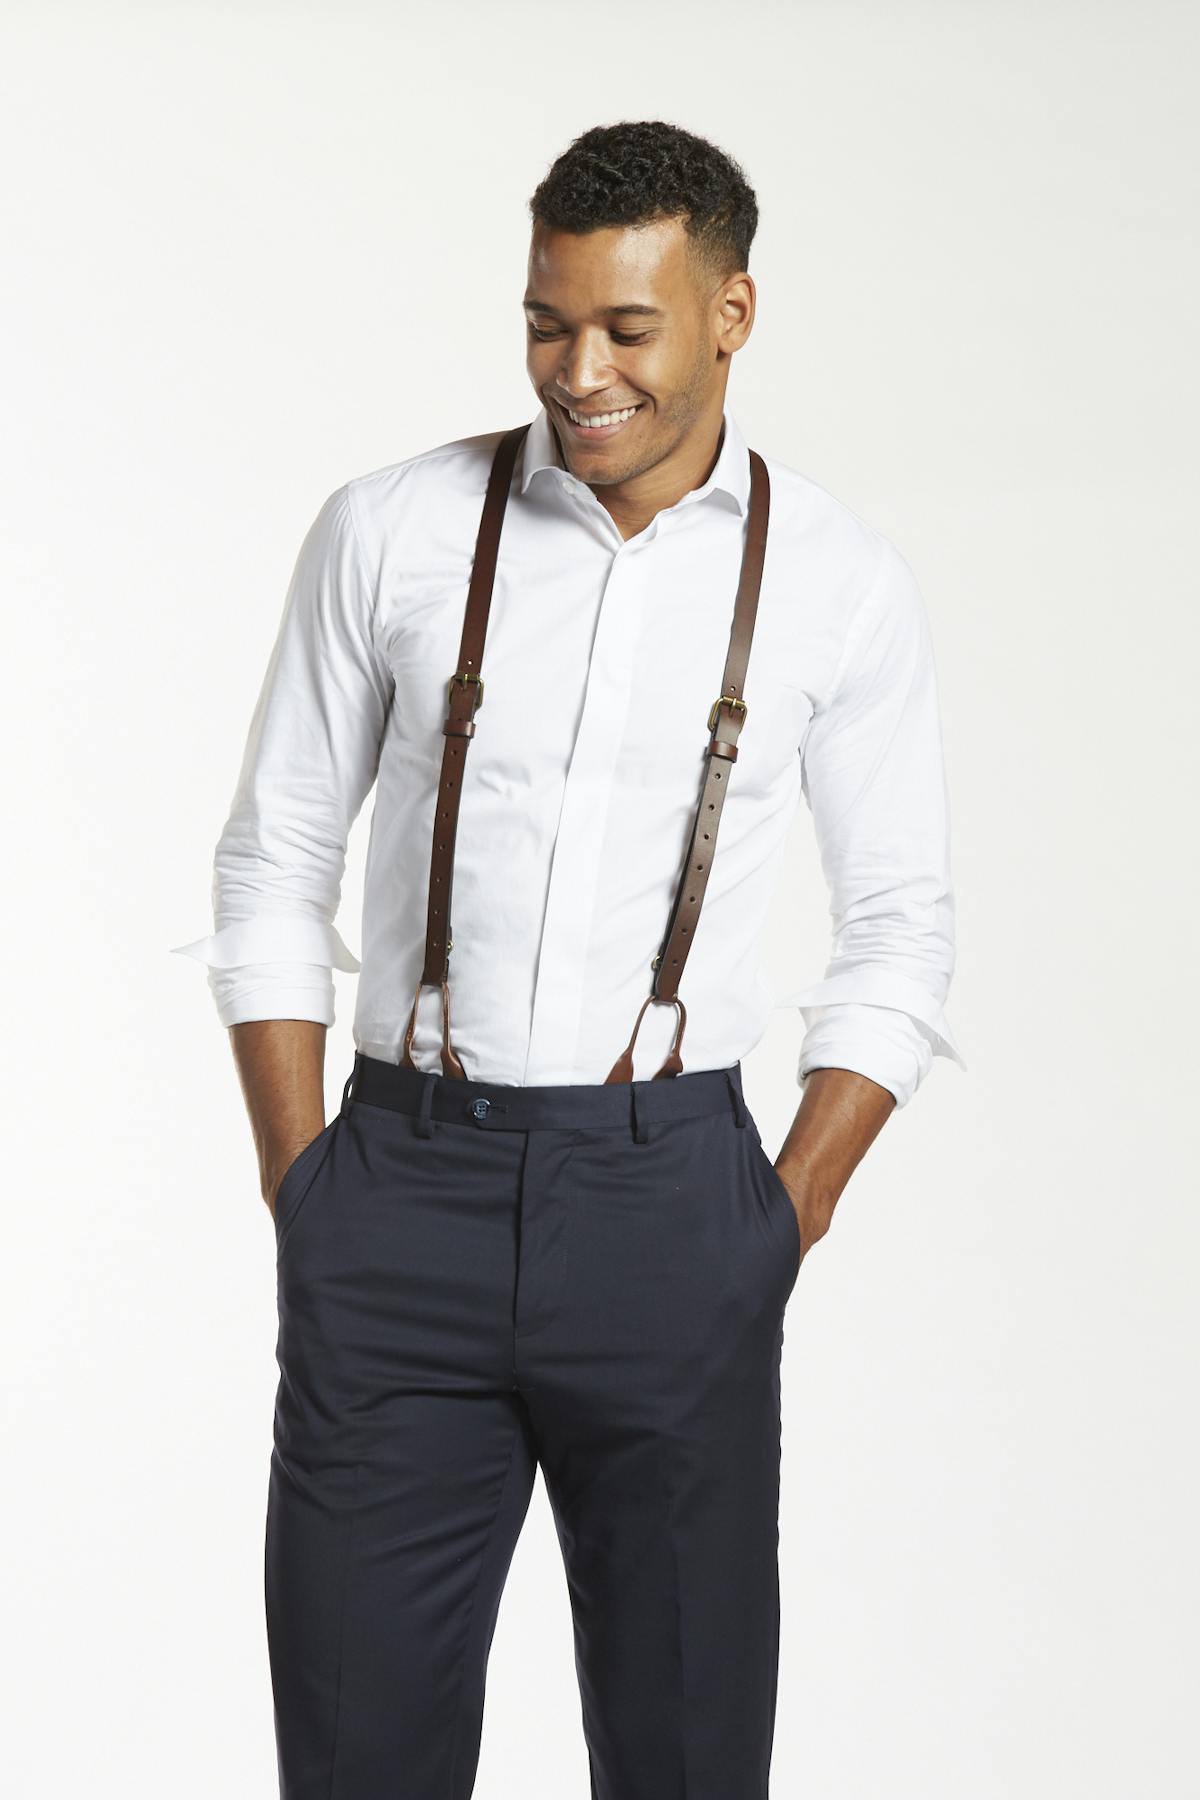 How To Style Suspenders For Men | Suitshop